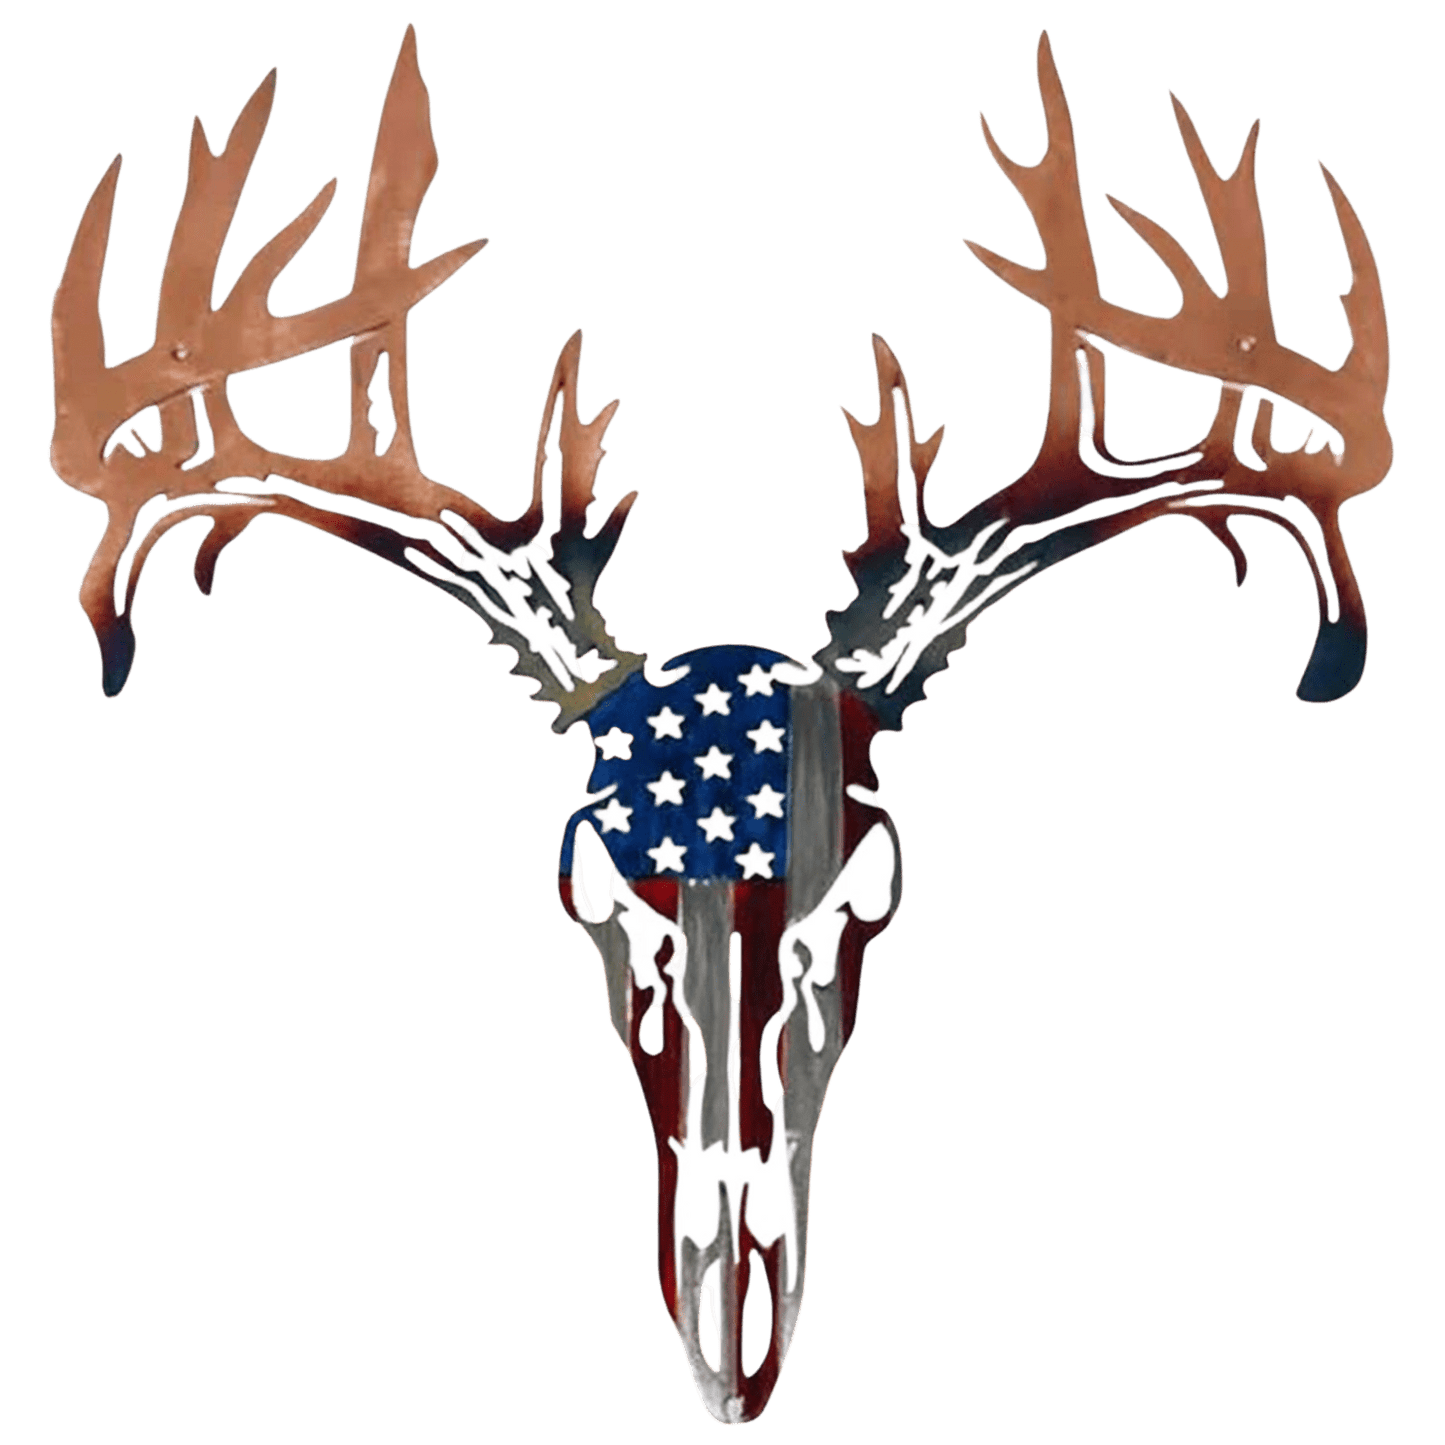 Silhouettes Patriotic Metal Deer Head Metal Wall - Home Decor Gifts and More